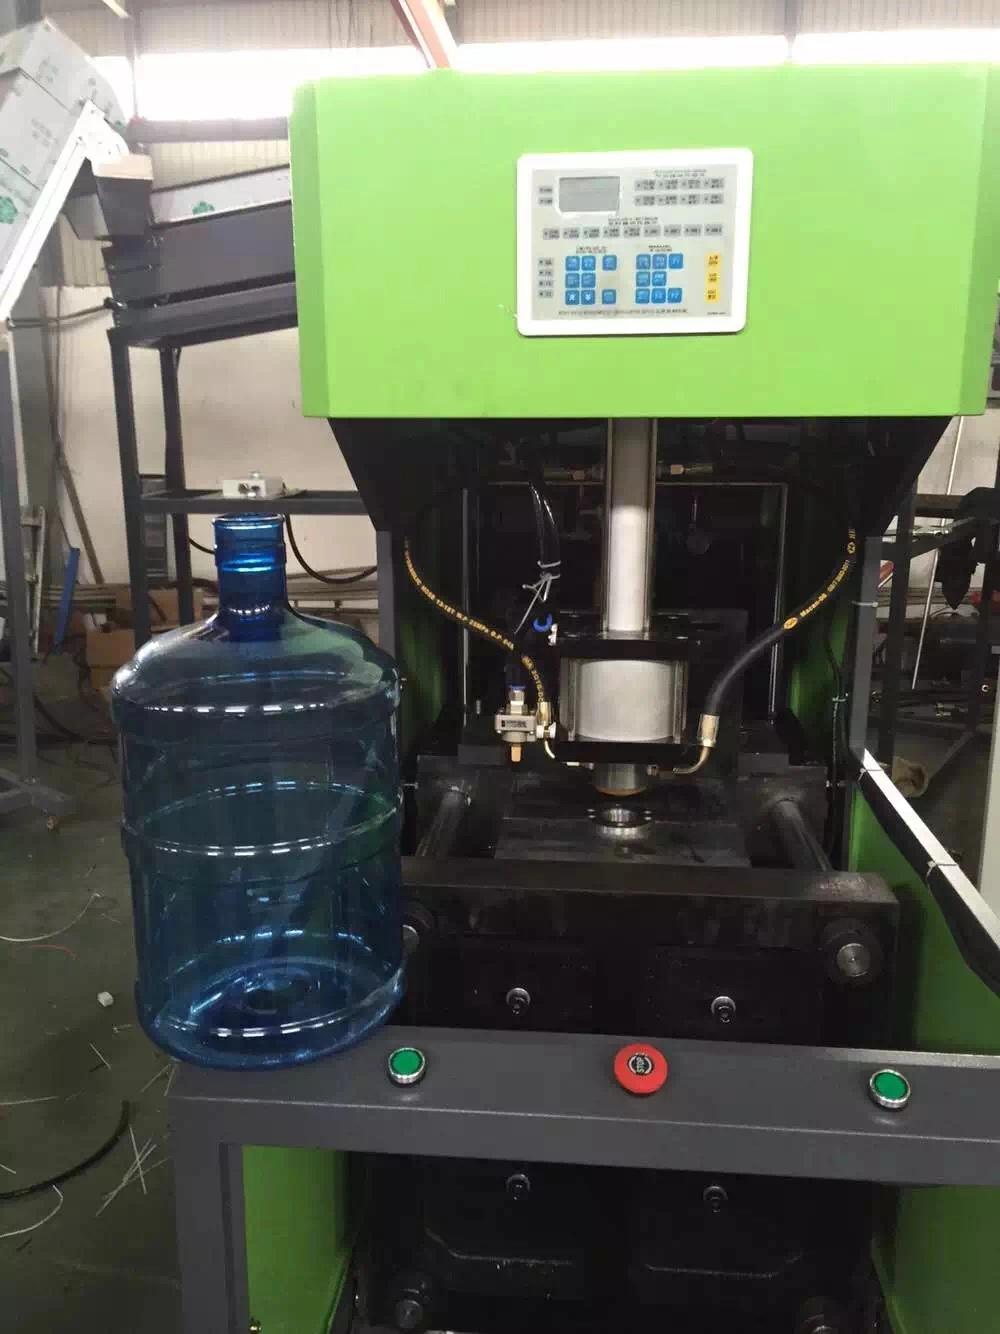 Automatic 5gallon Bottle Drinking Mineral Pure Water Filling Machine